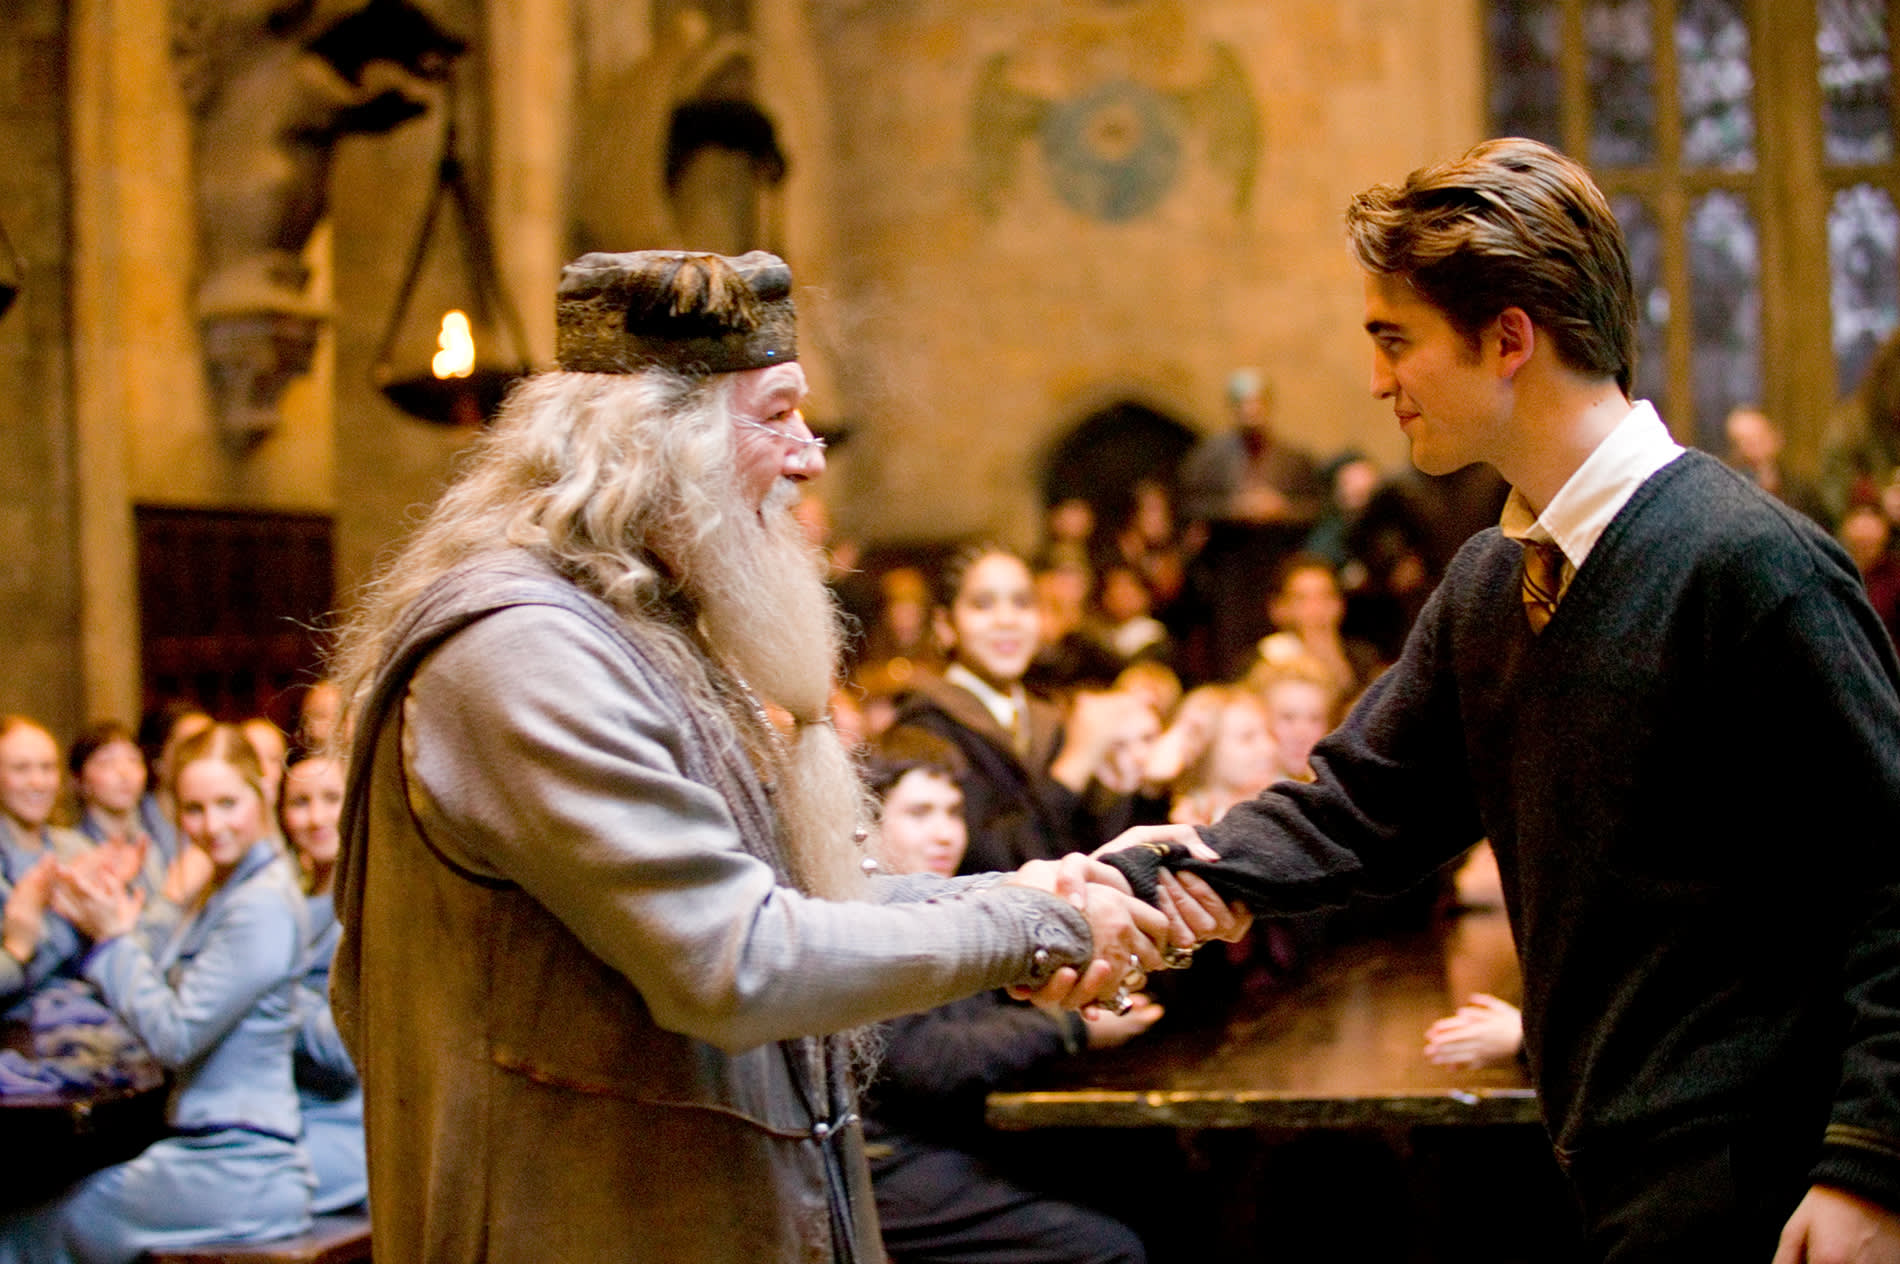 WB-HP-F4-dumbledore-shakes-hand-with-cedric-at-triwizard-naming-ceremony-web-landscape